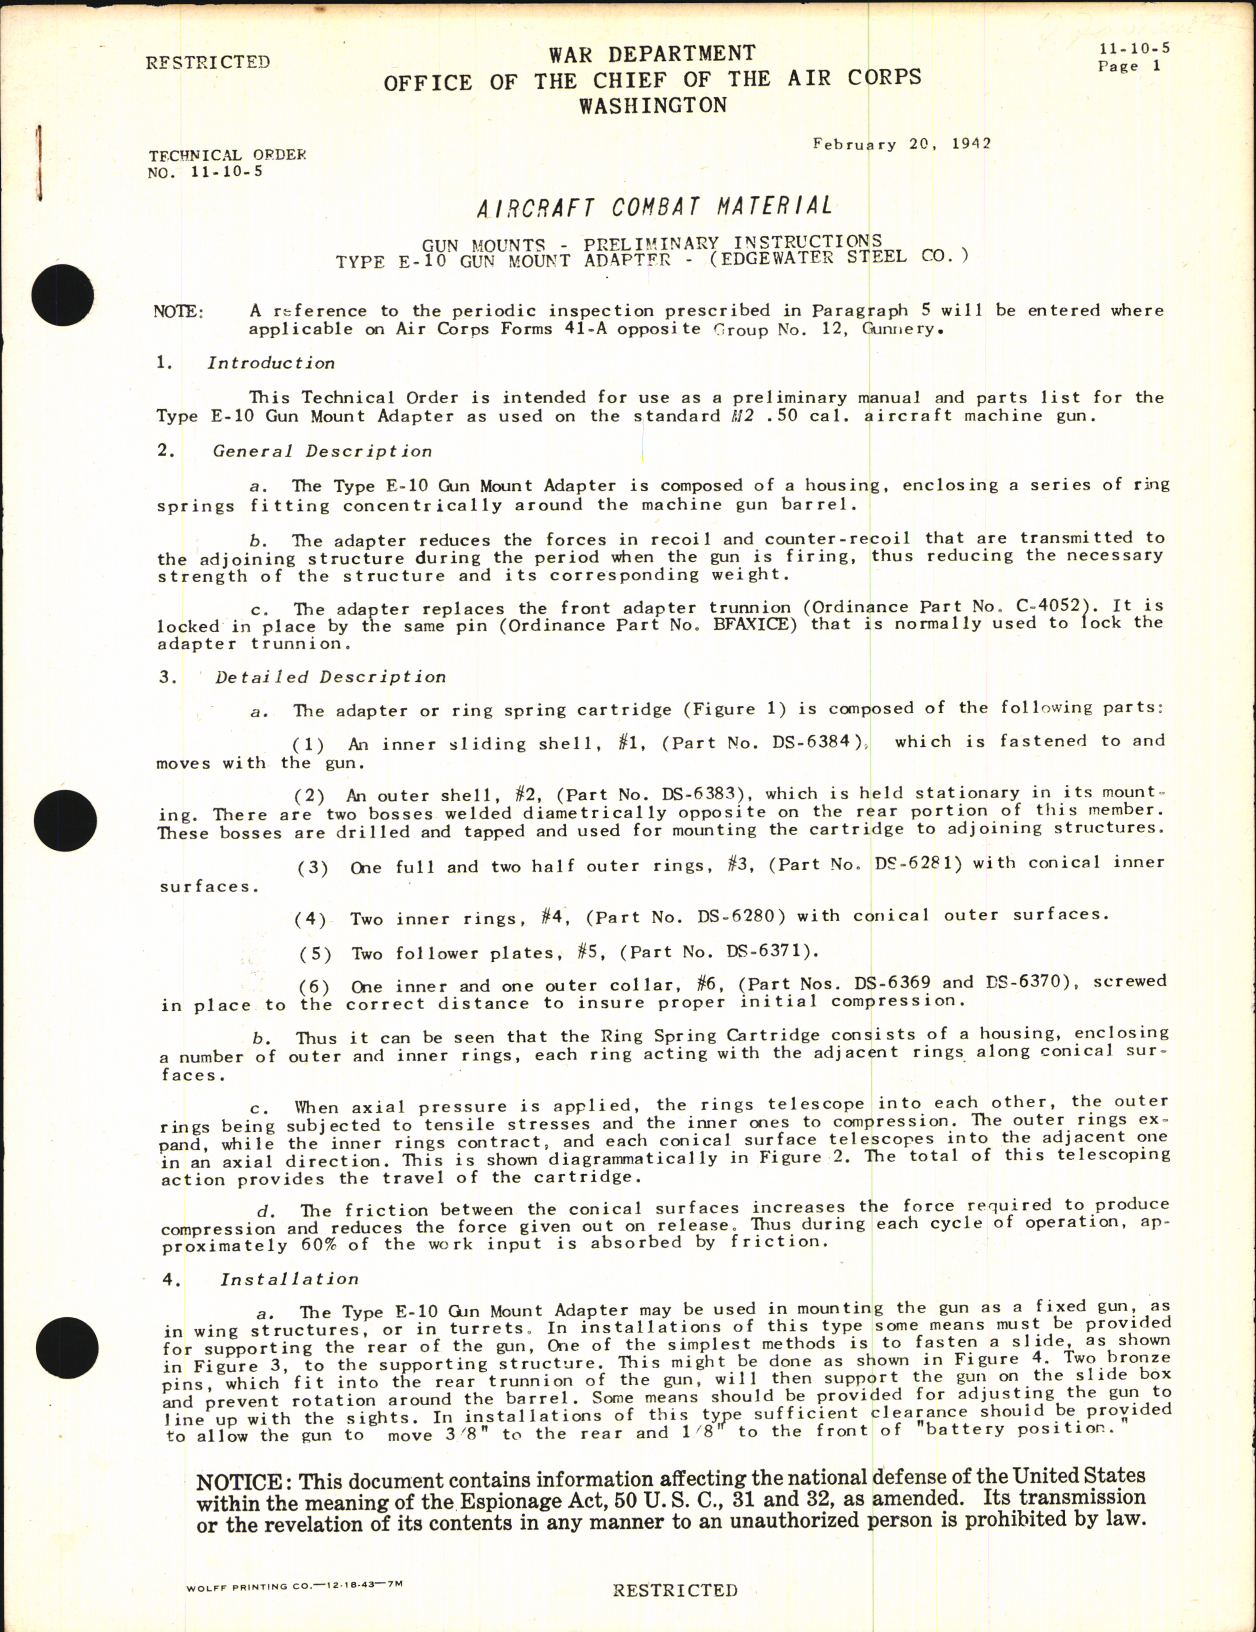 Sample page 1 from AirCorps Library document: Preliminary Instructions for Type E-10 Gun Mount Adapter